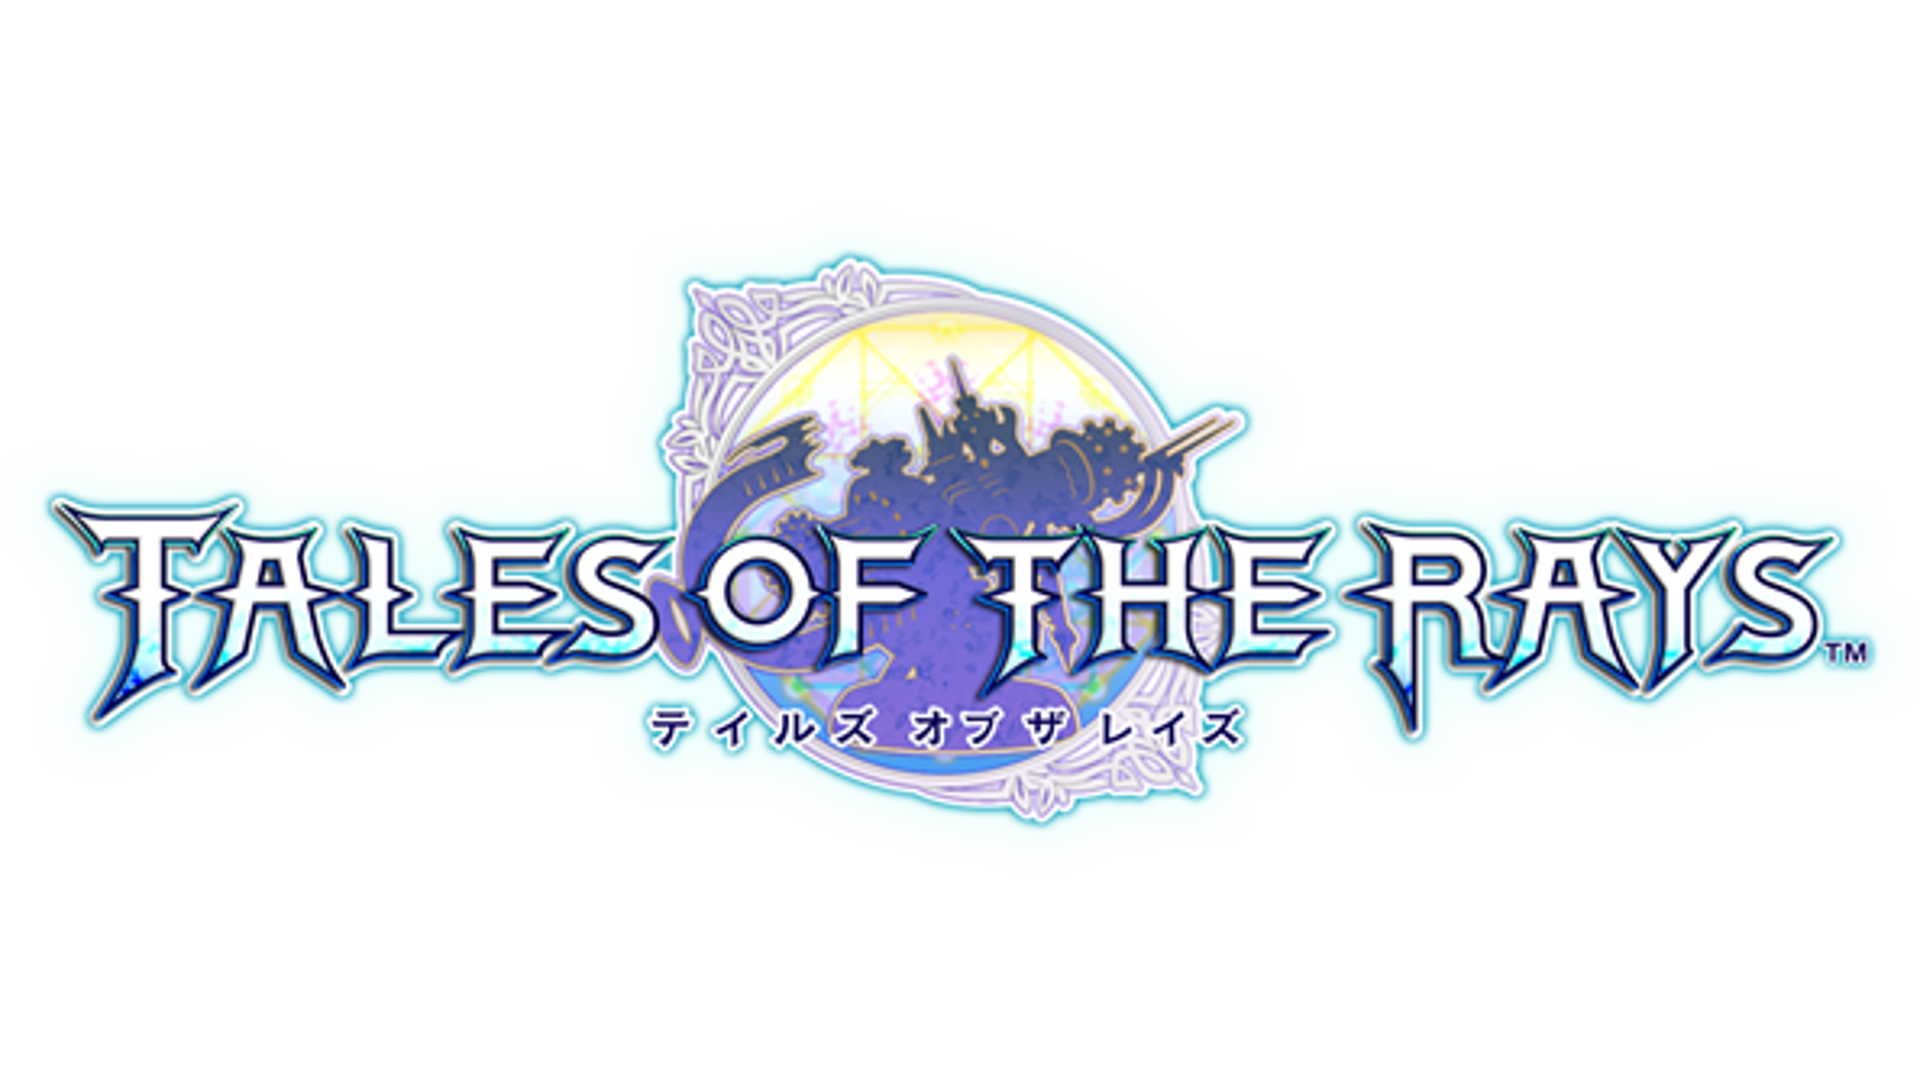 Tales of the Rays Logo